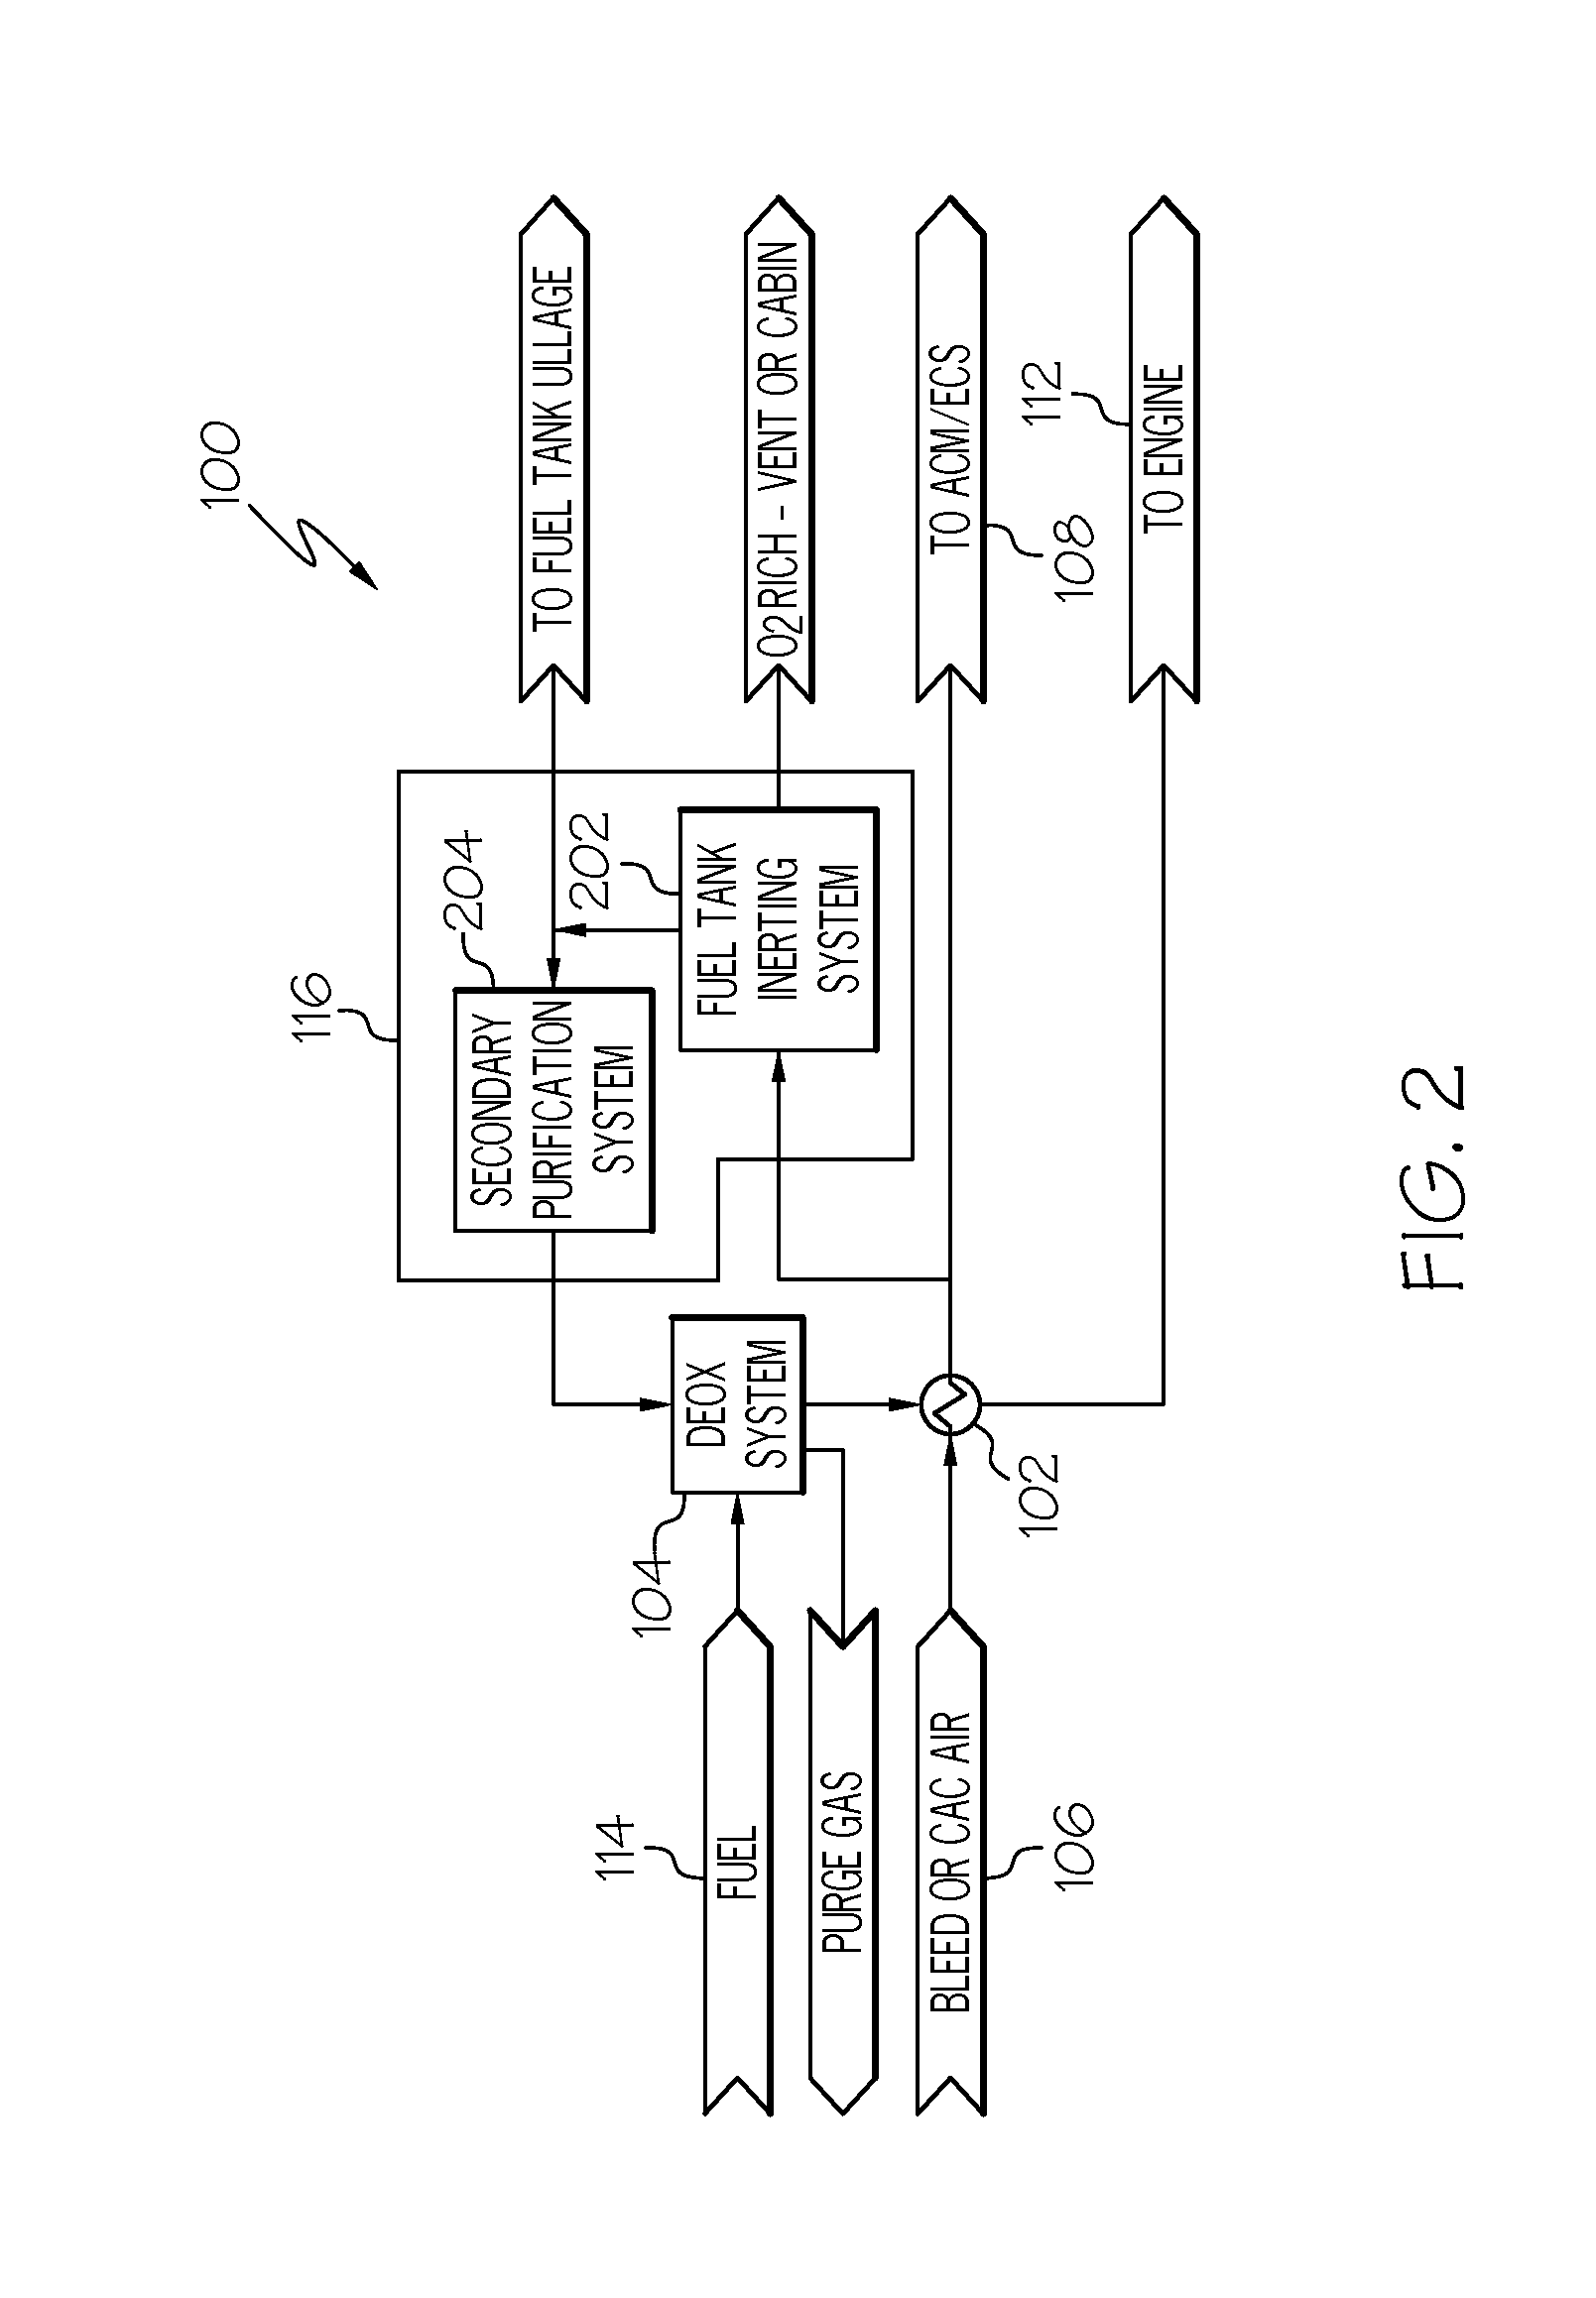 Fuel deoxygenation and fuel tank inerting system and method